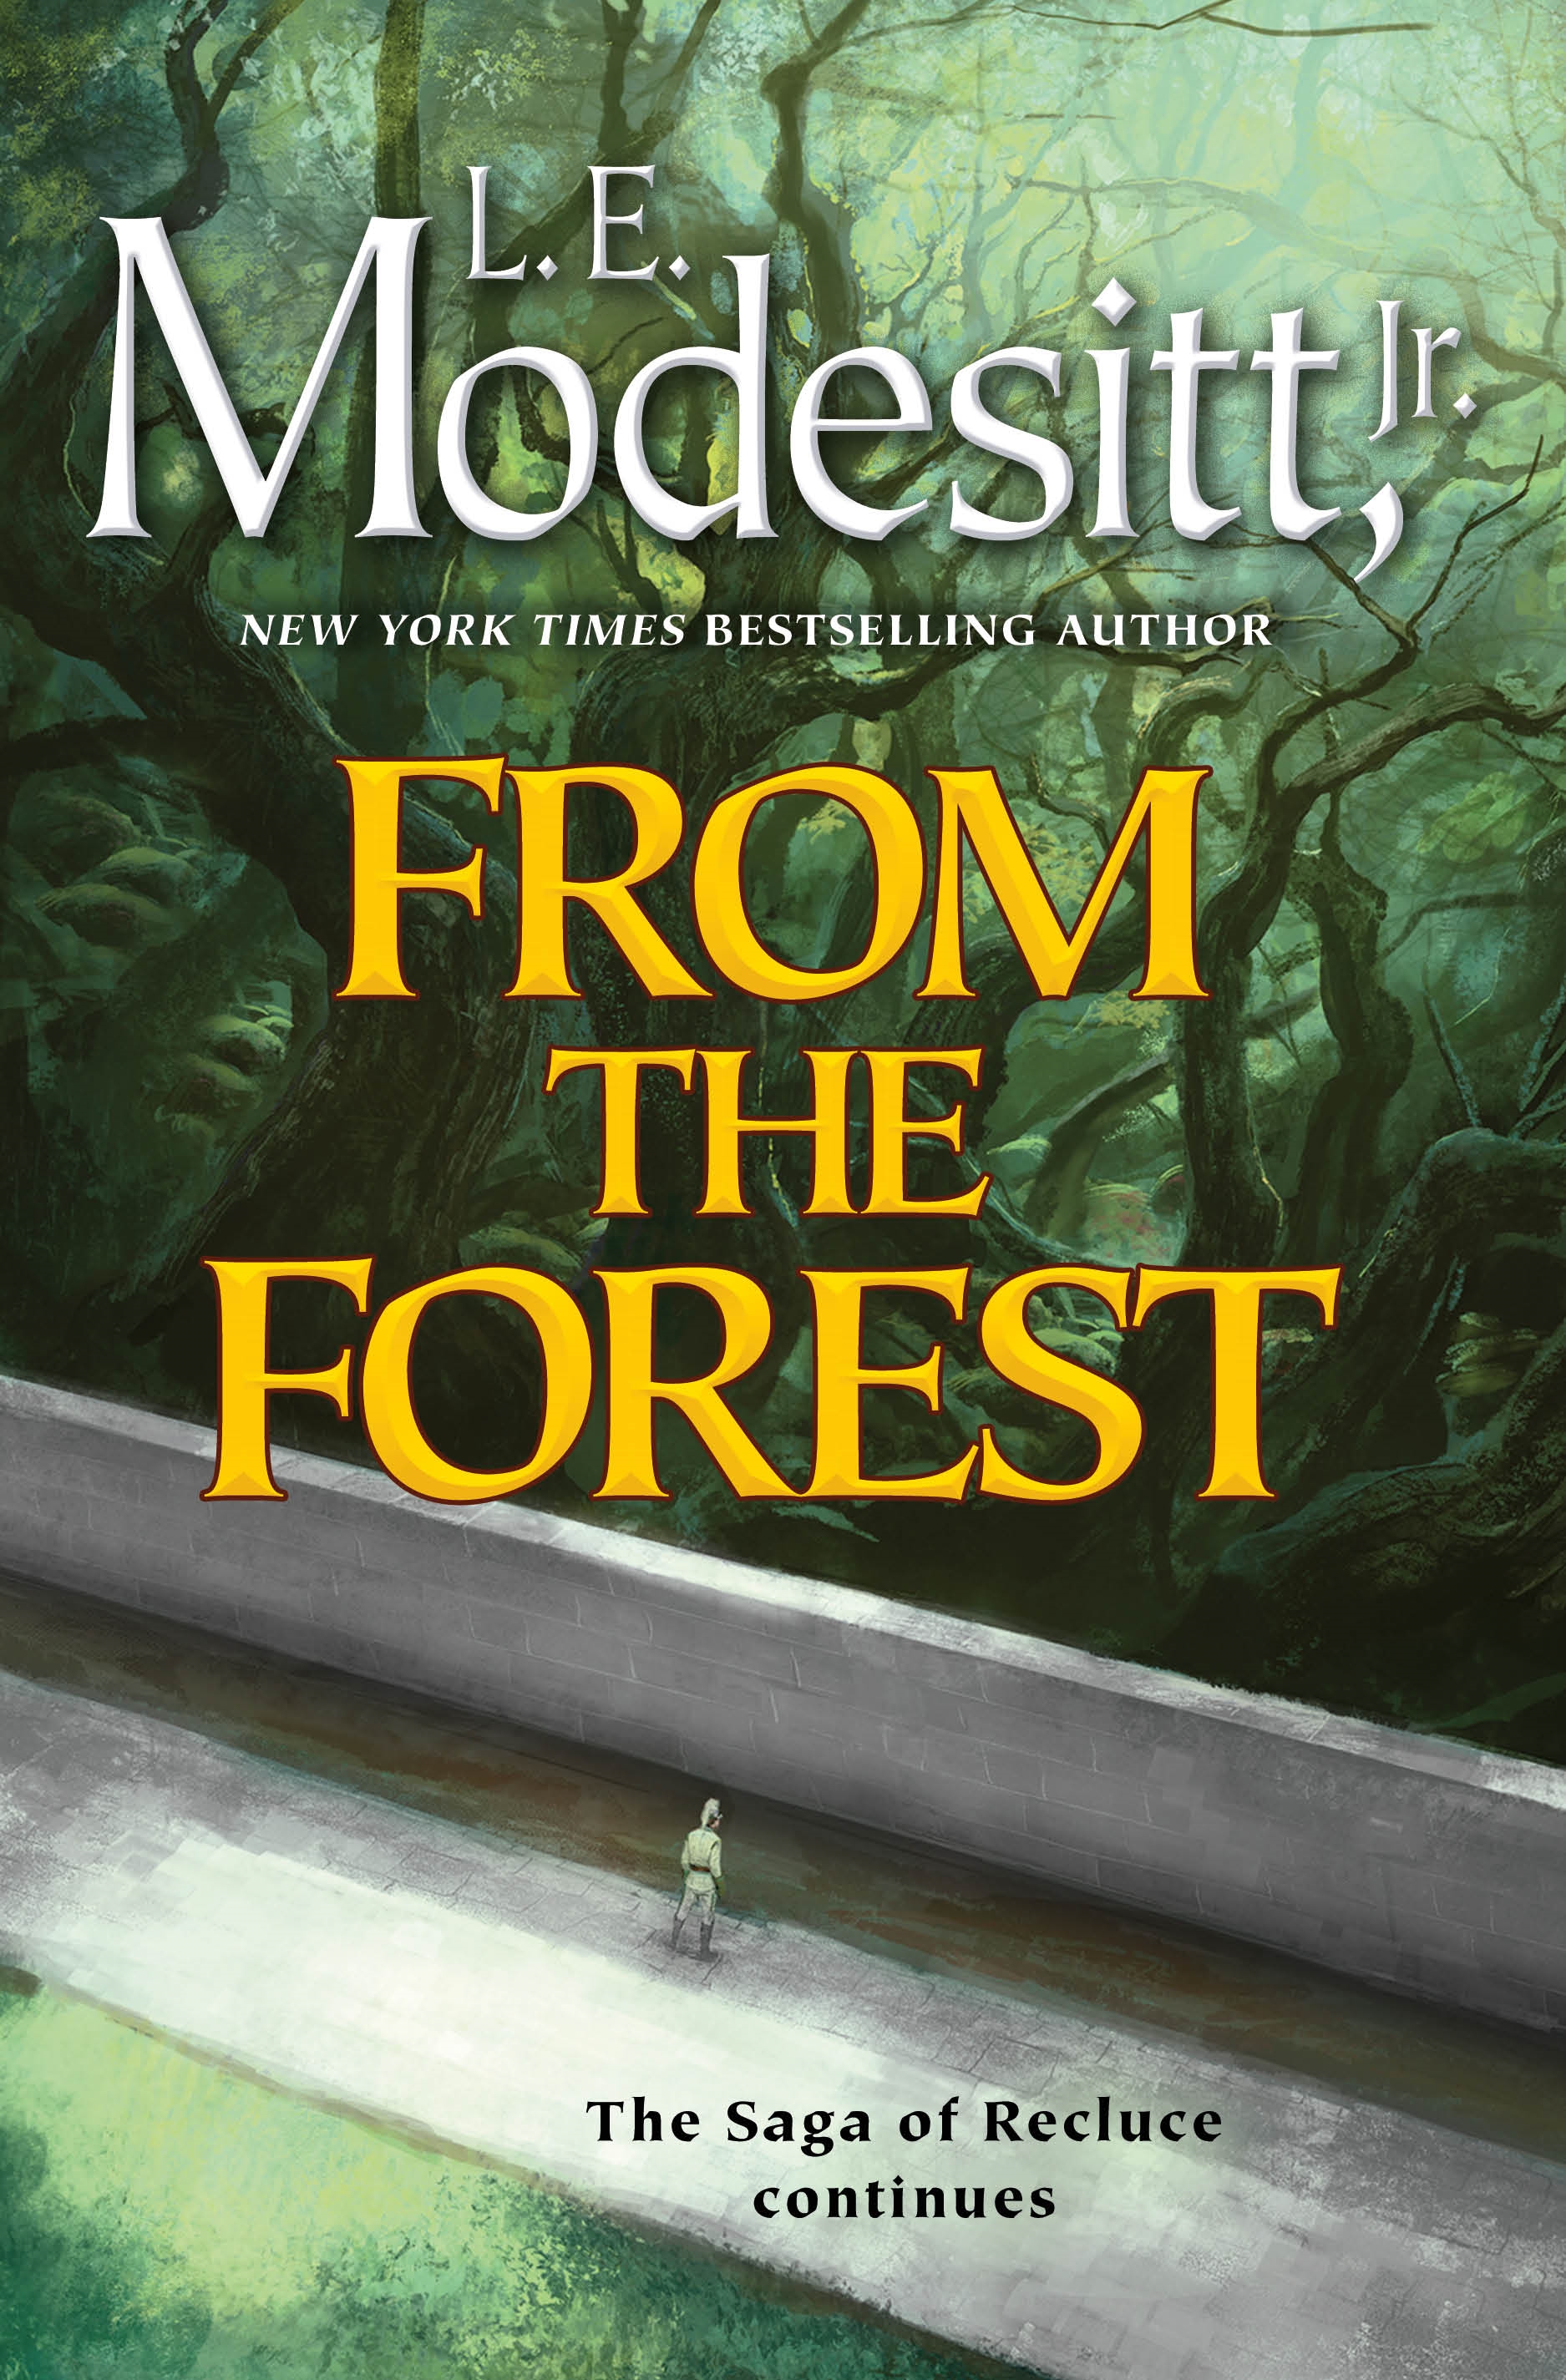 From the Forest by L. E. Modesitt, Jr.